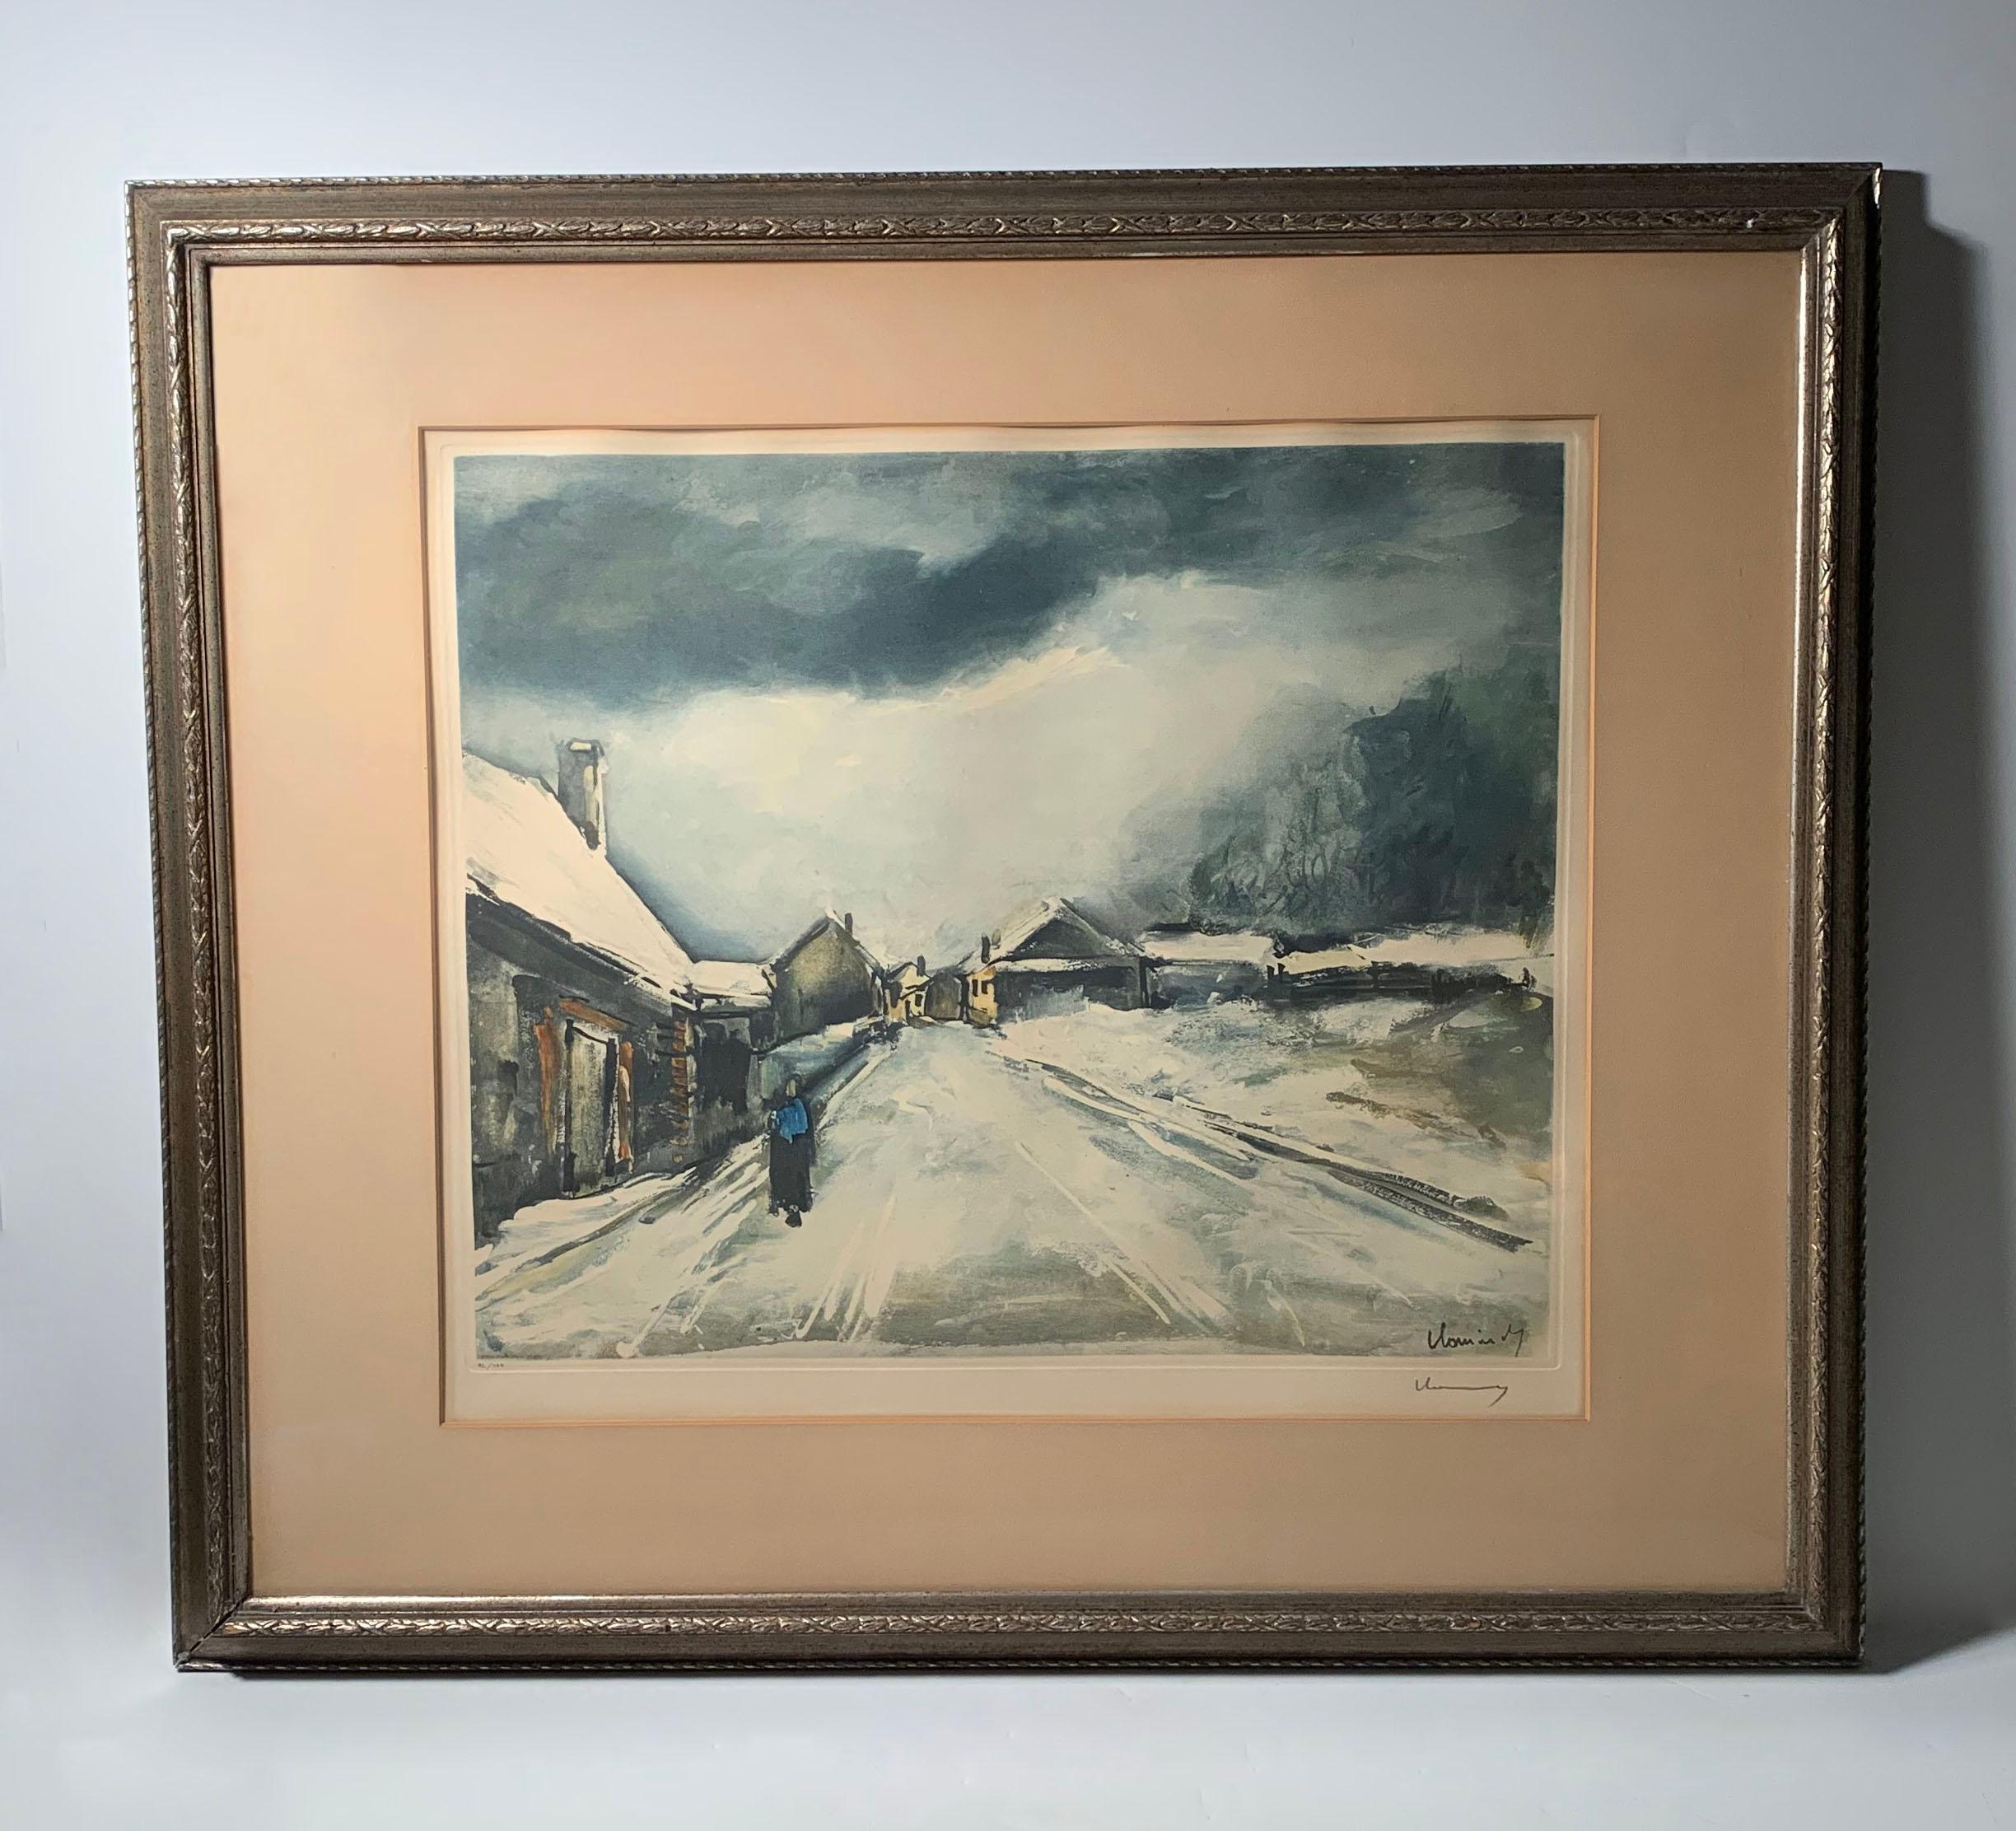 Village Sous la Neige, 1955
Color heliograph
Measures: 17 5/8 × 21 1/8 in
44.8 × 53.7 cm
Edition 92/100

Signed in pencil lower right, 